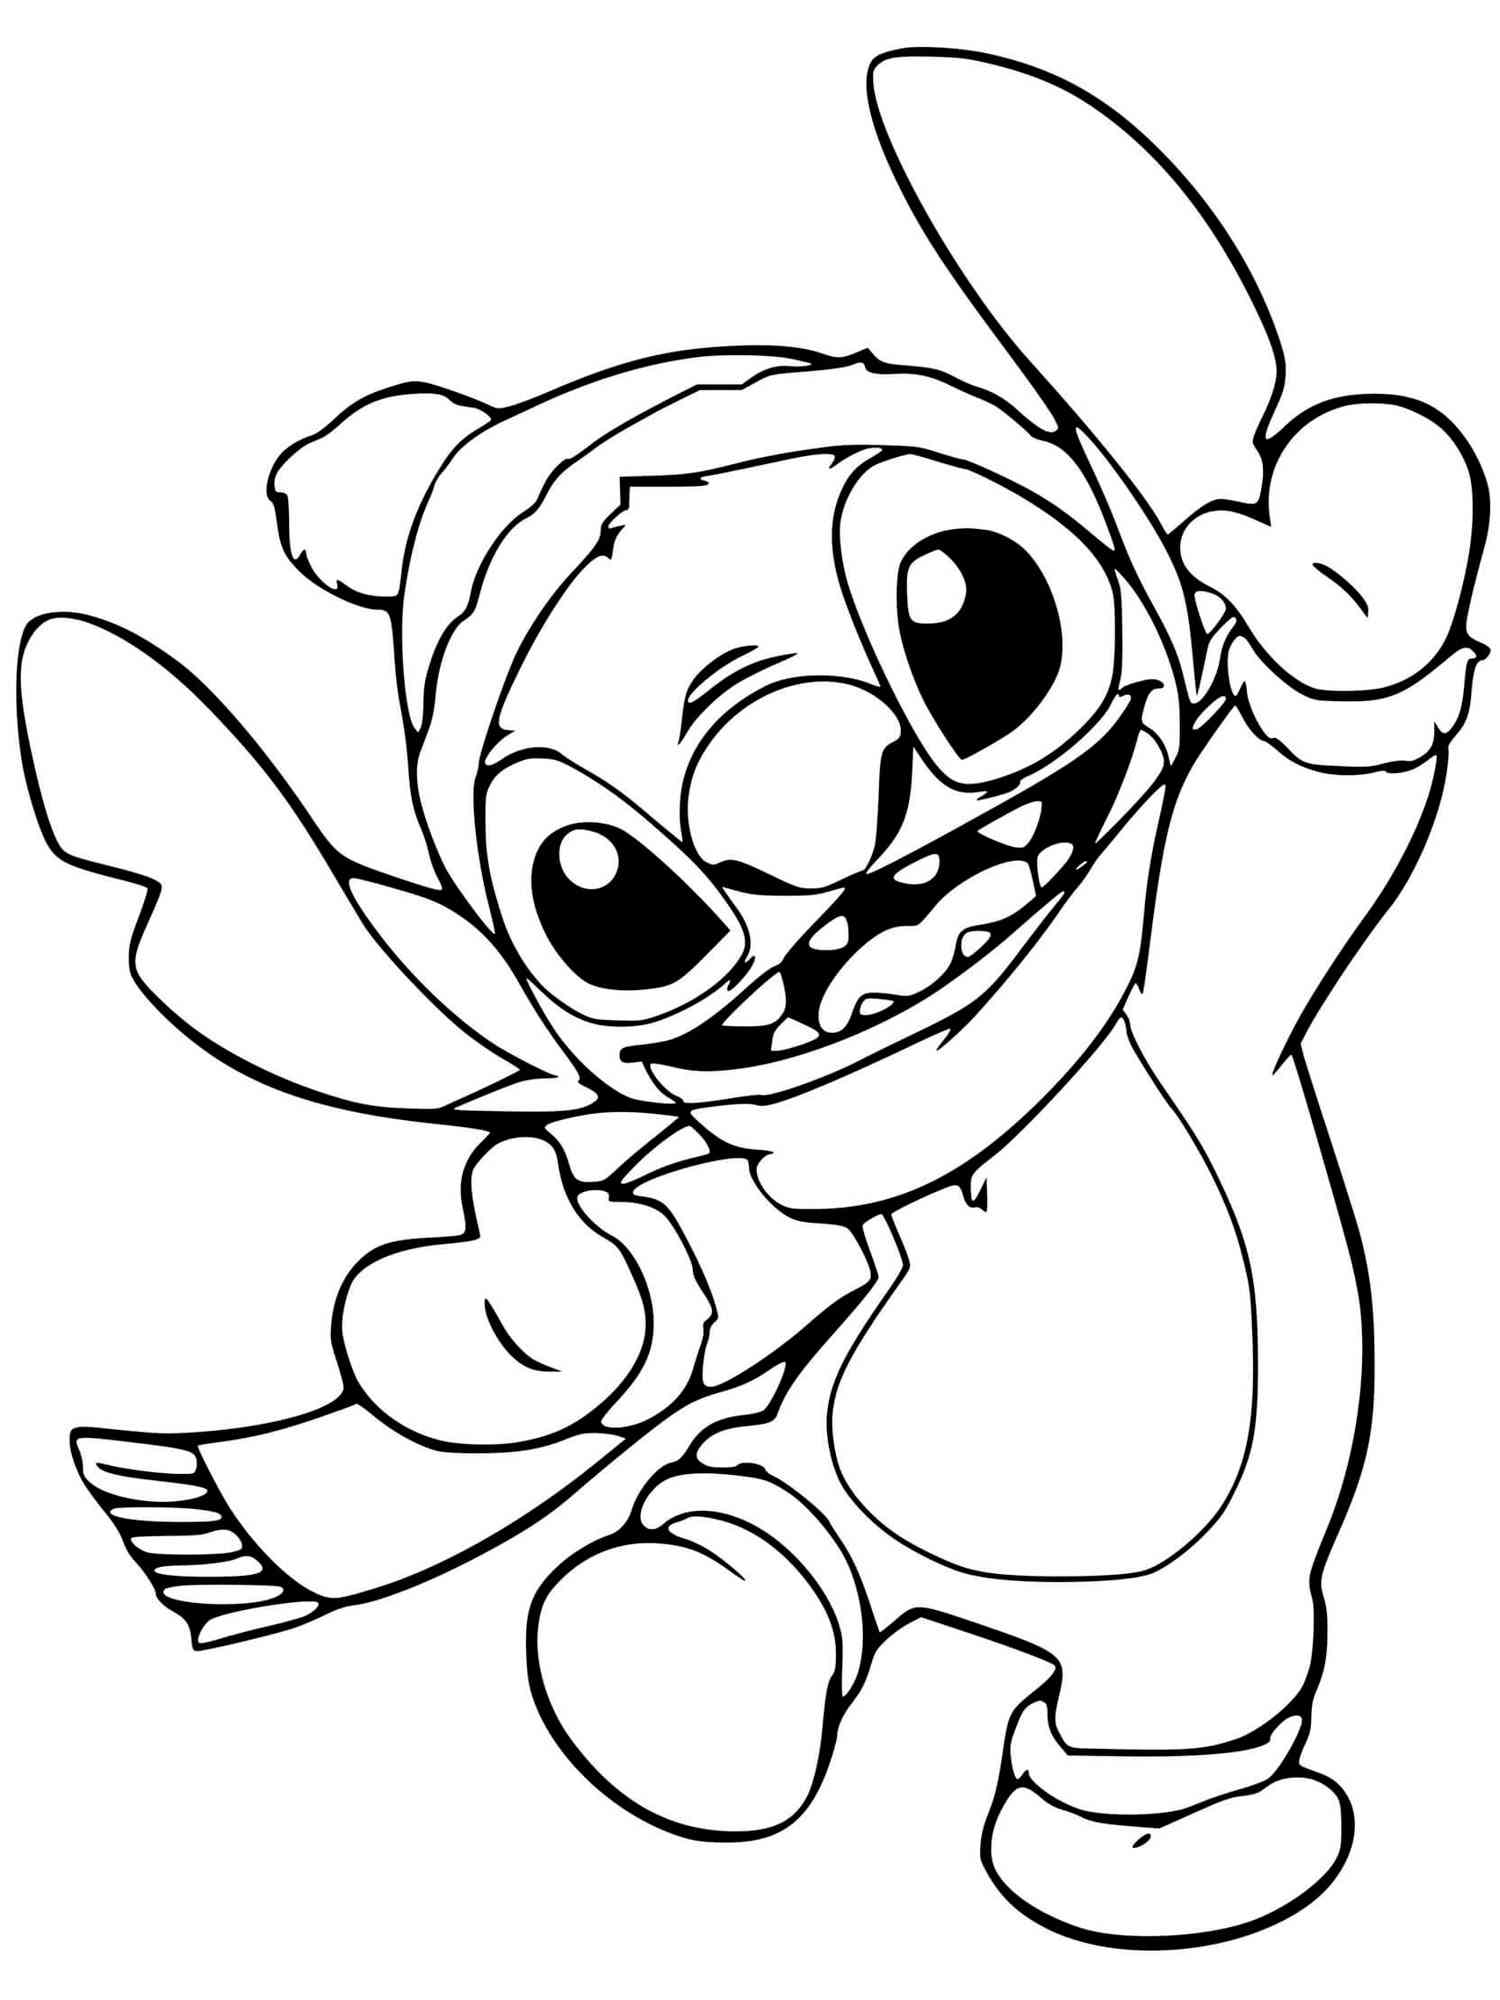 Lilo and Stitch coloring pages. Download and print Lilo and Stitch ...